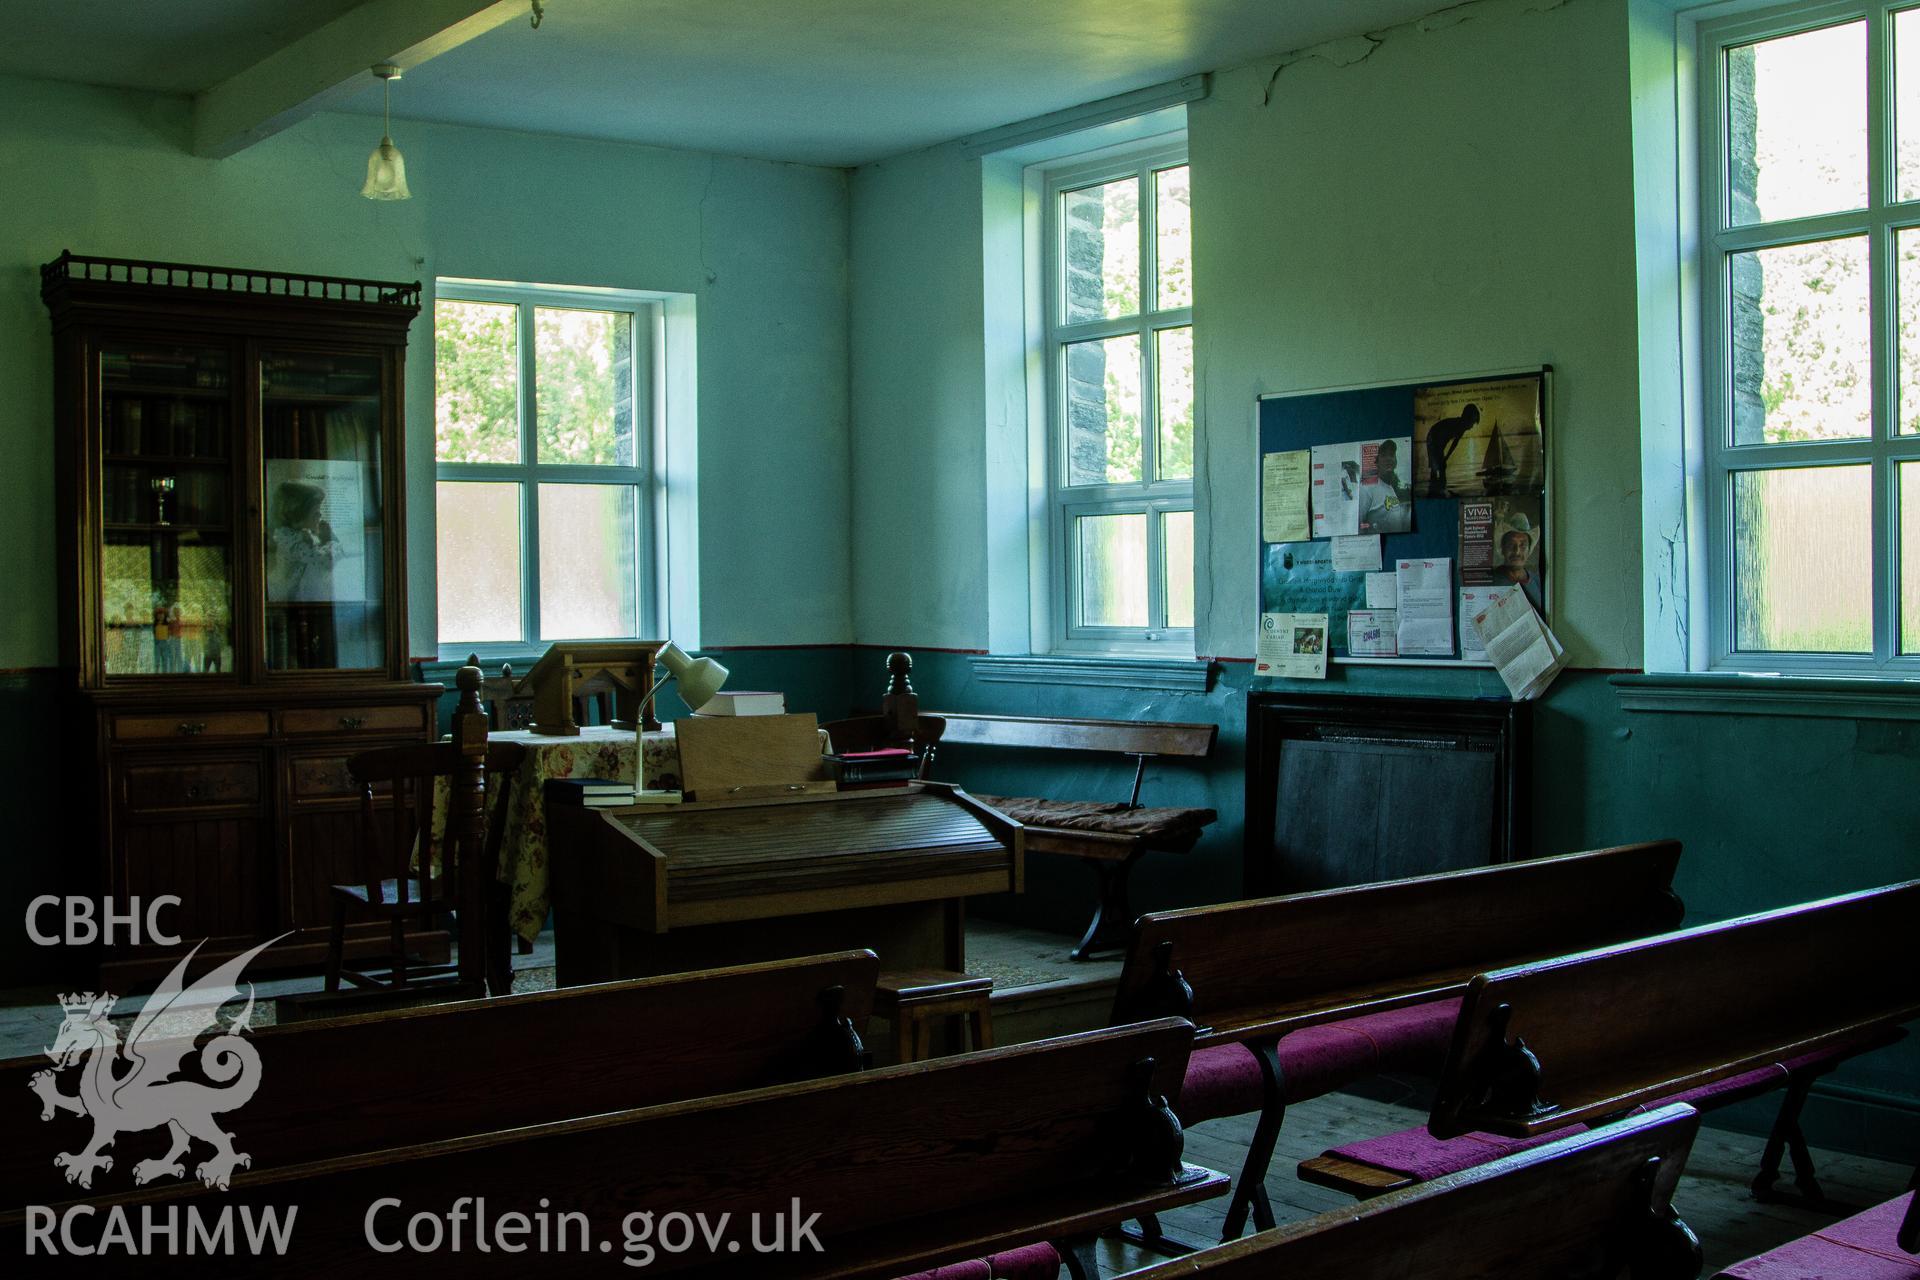 Colour photograph of interior of vestry where services were held when congregation had diminished - part of a photographic survey of Bethania Chapel, Aberangell, Gwynedd, produced for John Linden by Adrian John Hexter, as a condition of planning consent. (Planning Application Ref. No. NP5/74/L319). Snowdonia National Park Planning Authority.